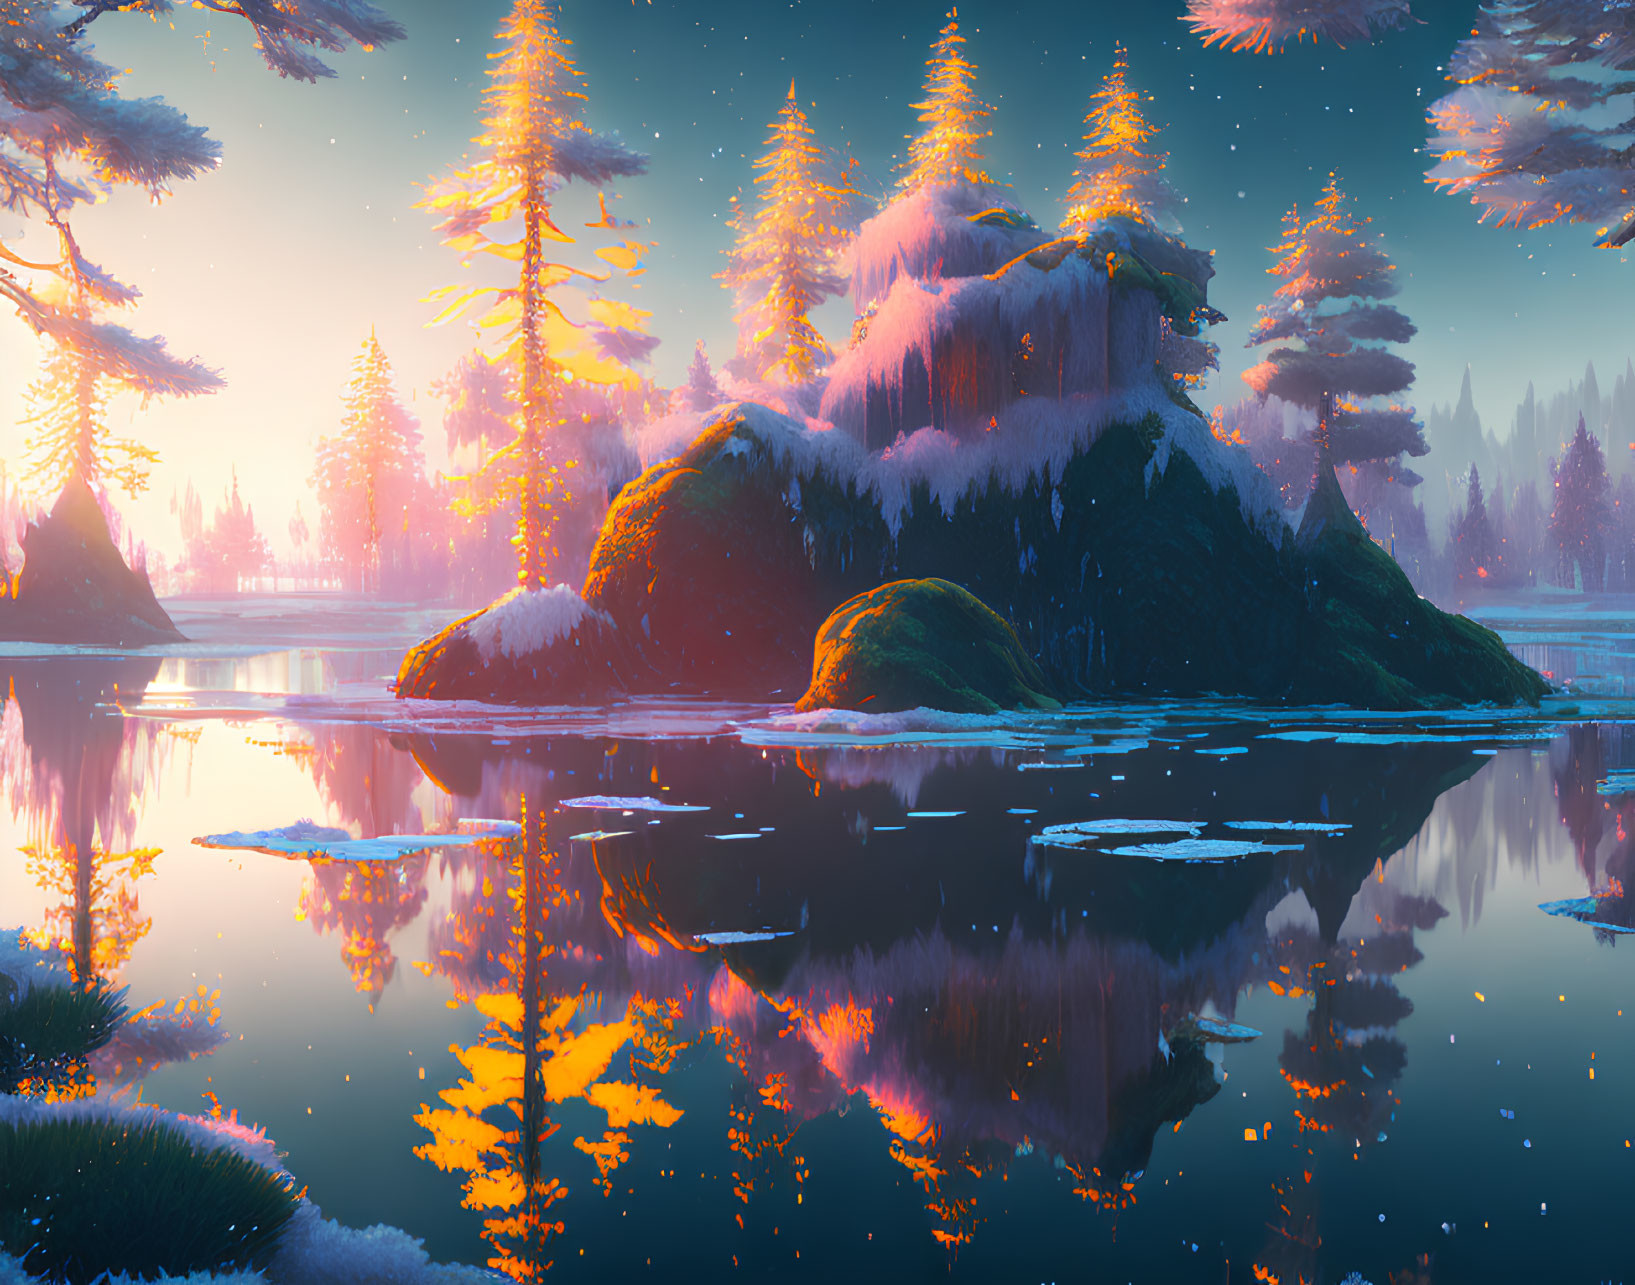 Tranquil snow-capped island in reflective lake at twilight